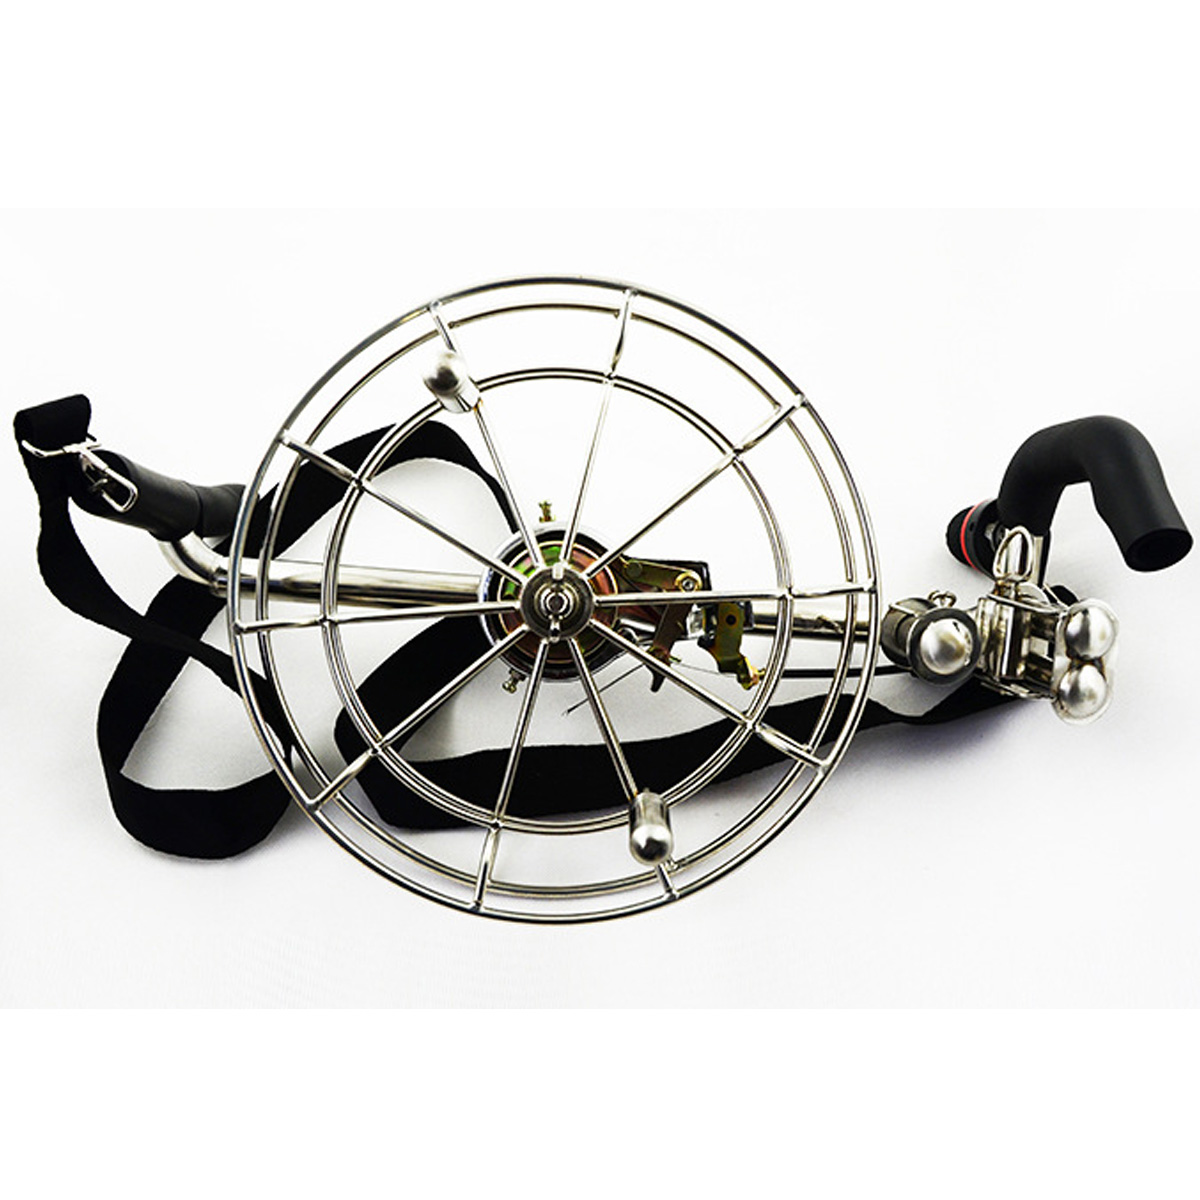 11quot-Strong-Stainless-Kite-Line-Winder-Reel-Brakes-Control-Adult-Men-1245865